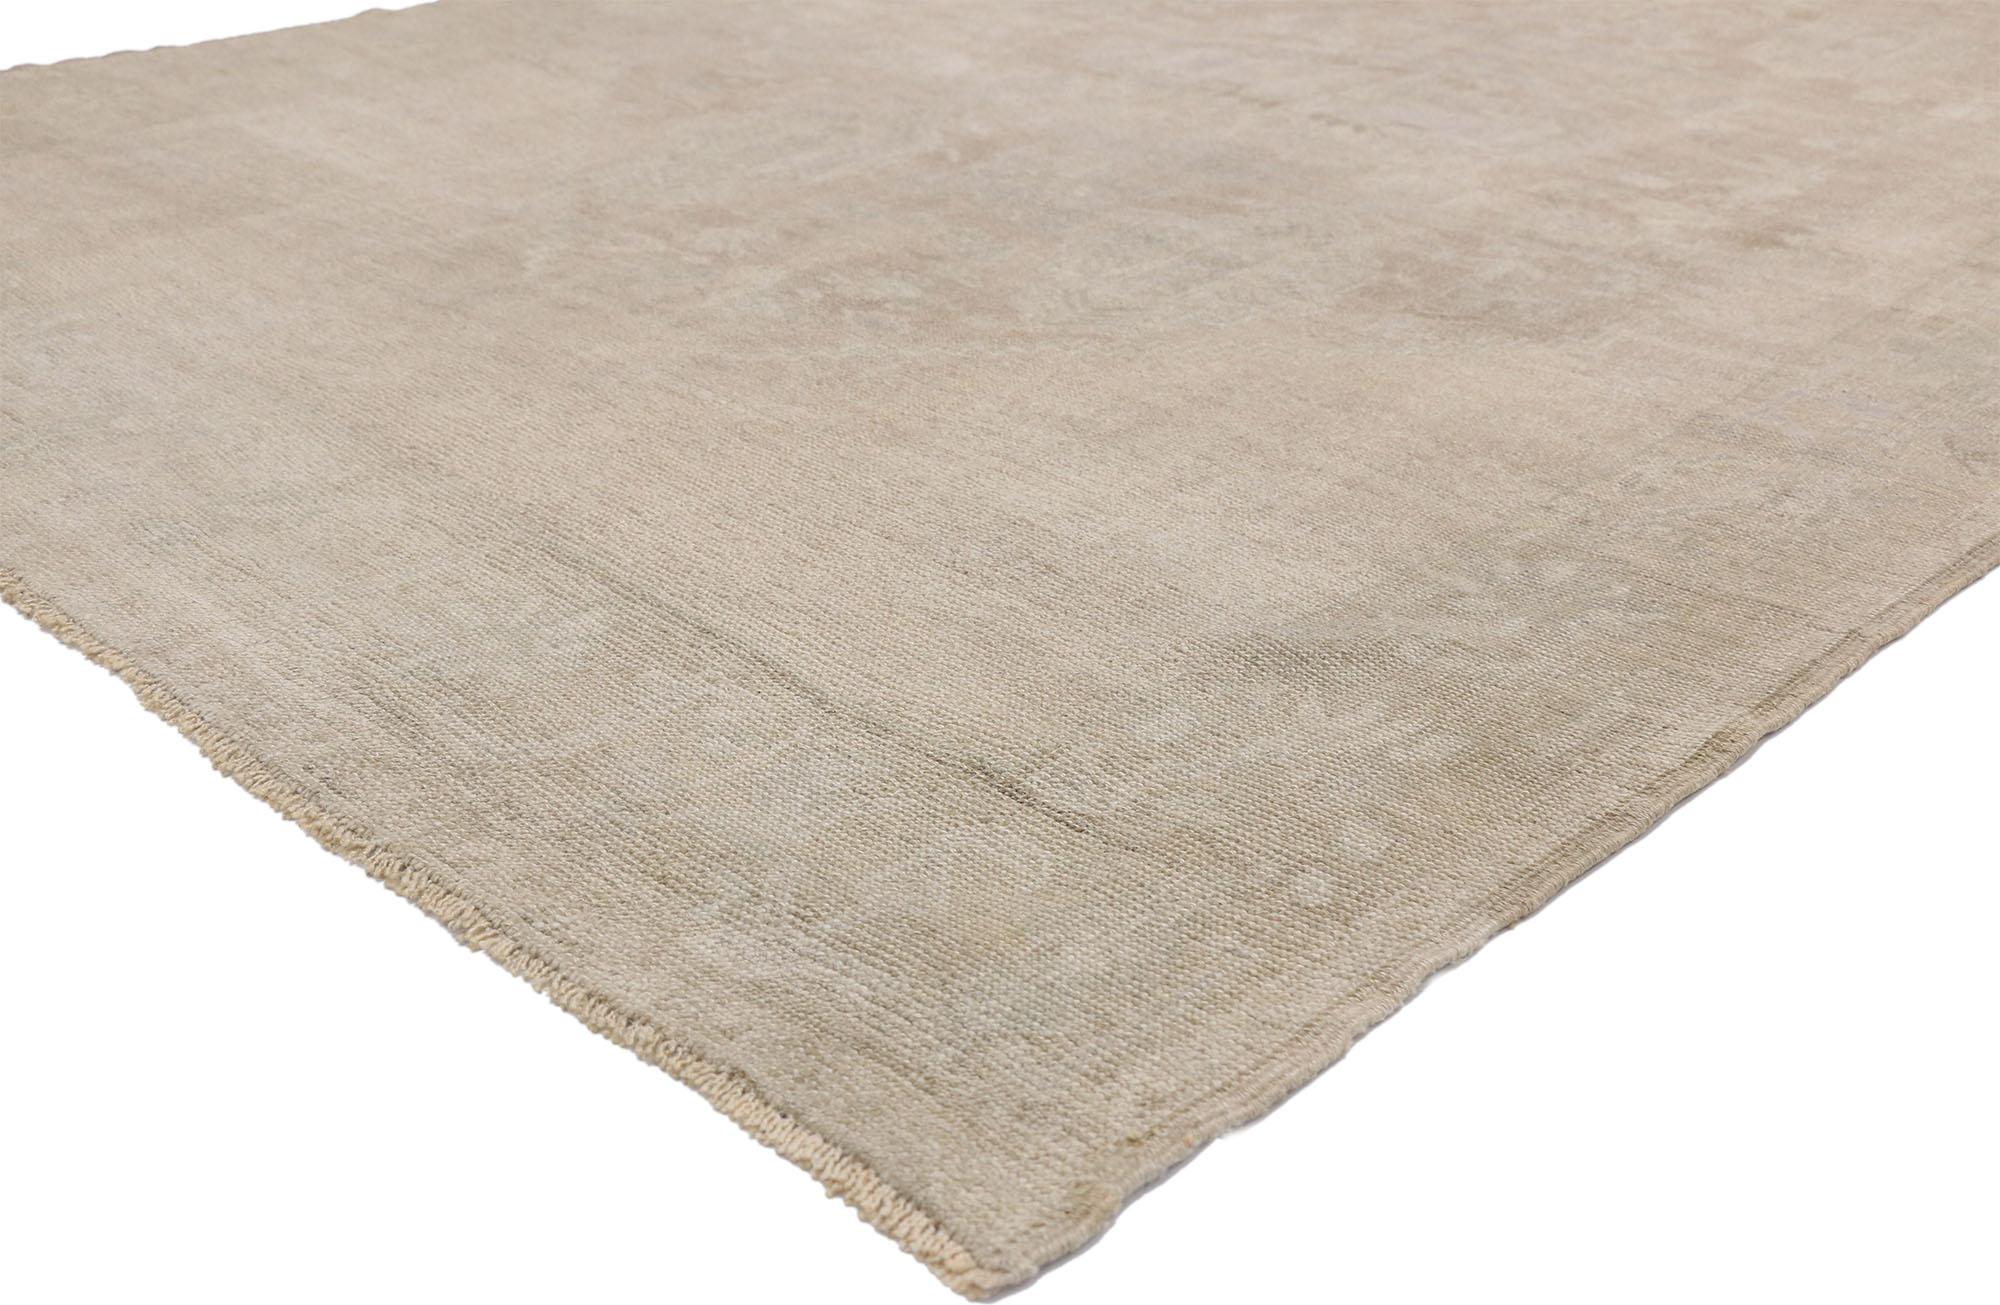 52457, vintage Turkish Oushak rug with Rustic chinoiserie style and muted colors. This hand knotted wool vintage Turkish Oushak rug with Rustic chinoiserie style is the perfect answer to upscale minimally appointed interiors. Intimate floral and